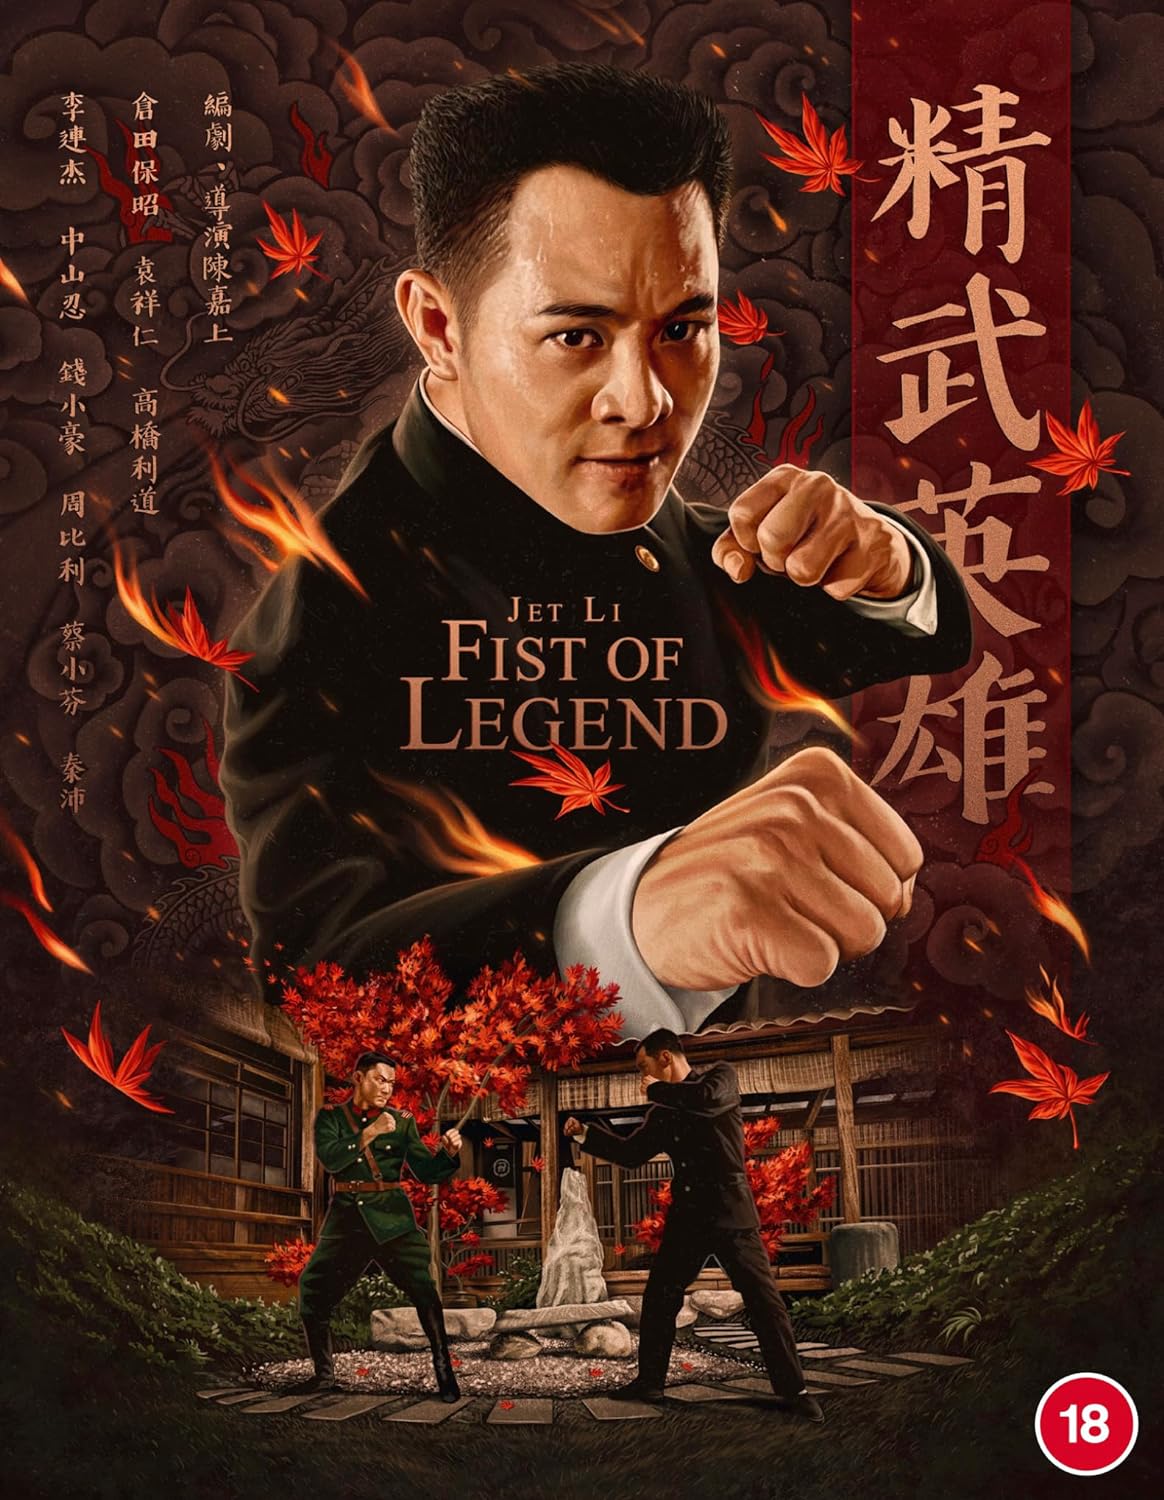 Fist of Legend Blu-ray with Slipcover (88 FIlms/Region B) [Preorder]